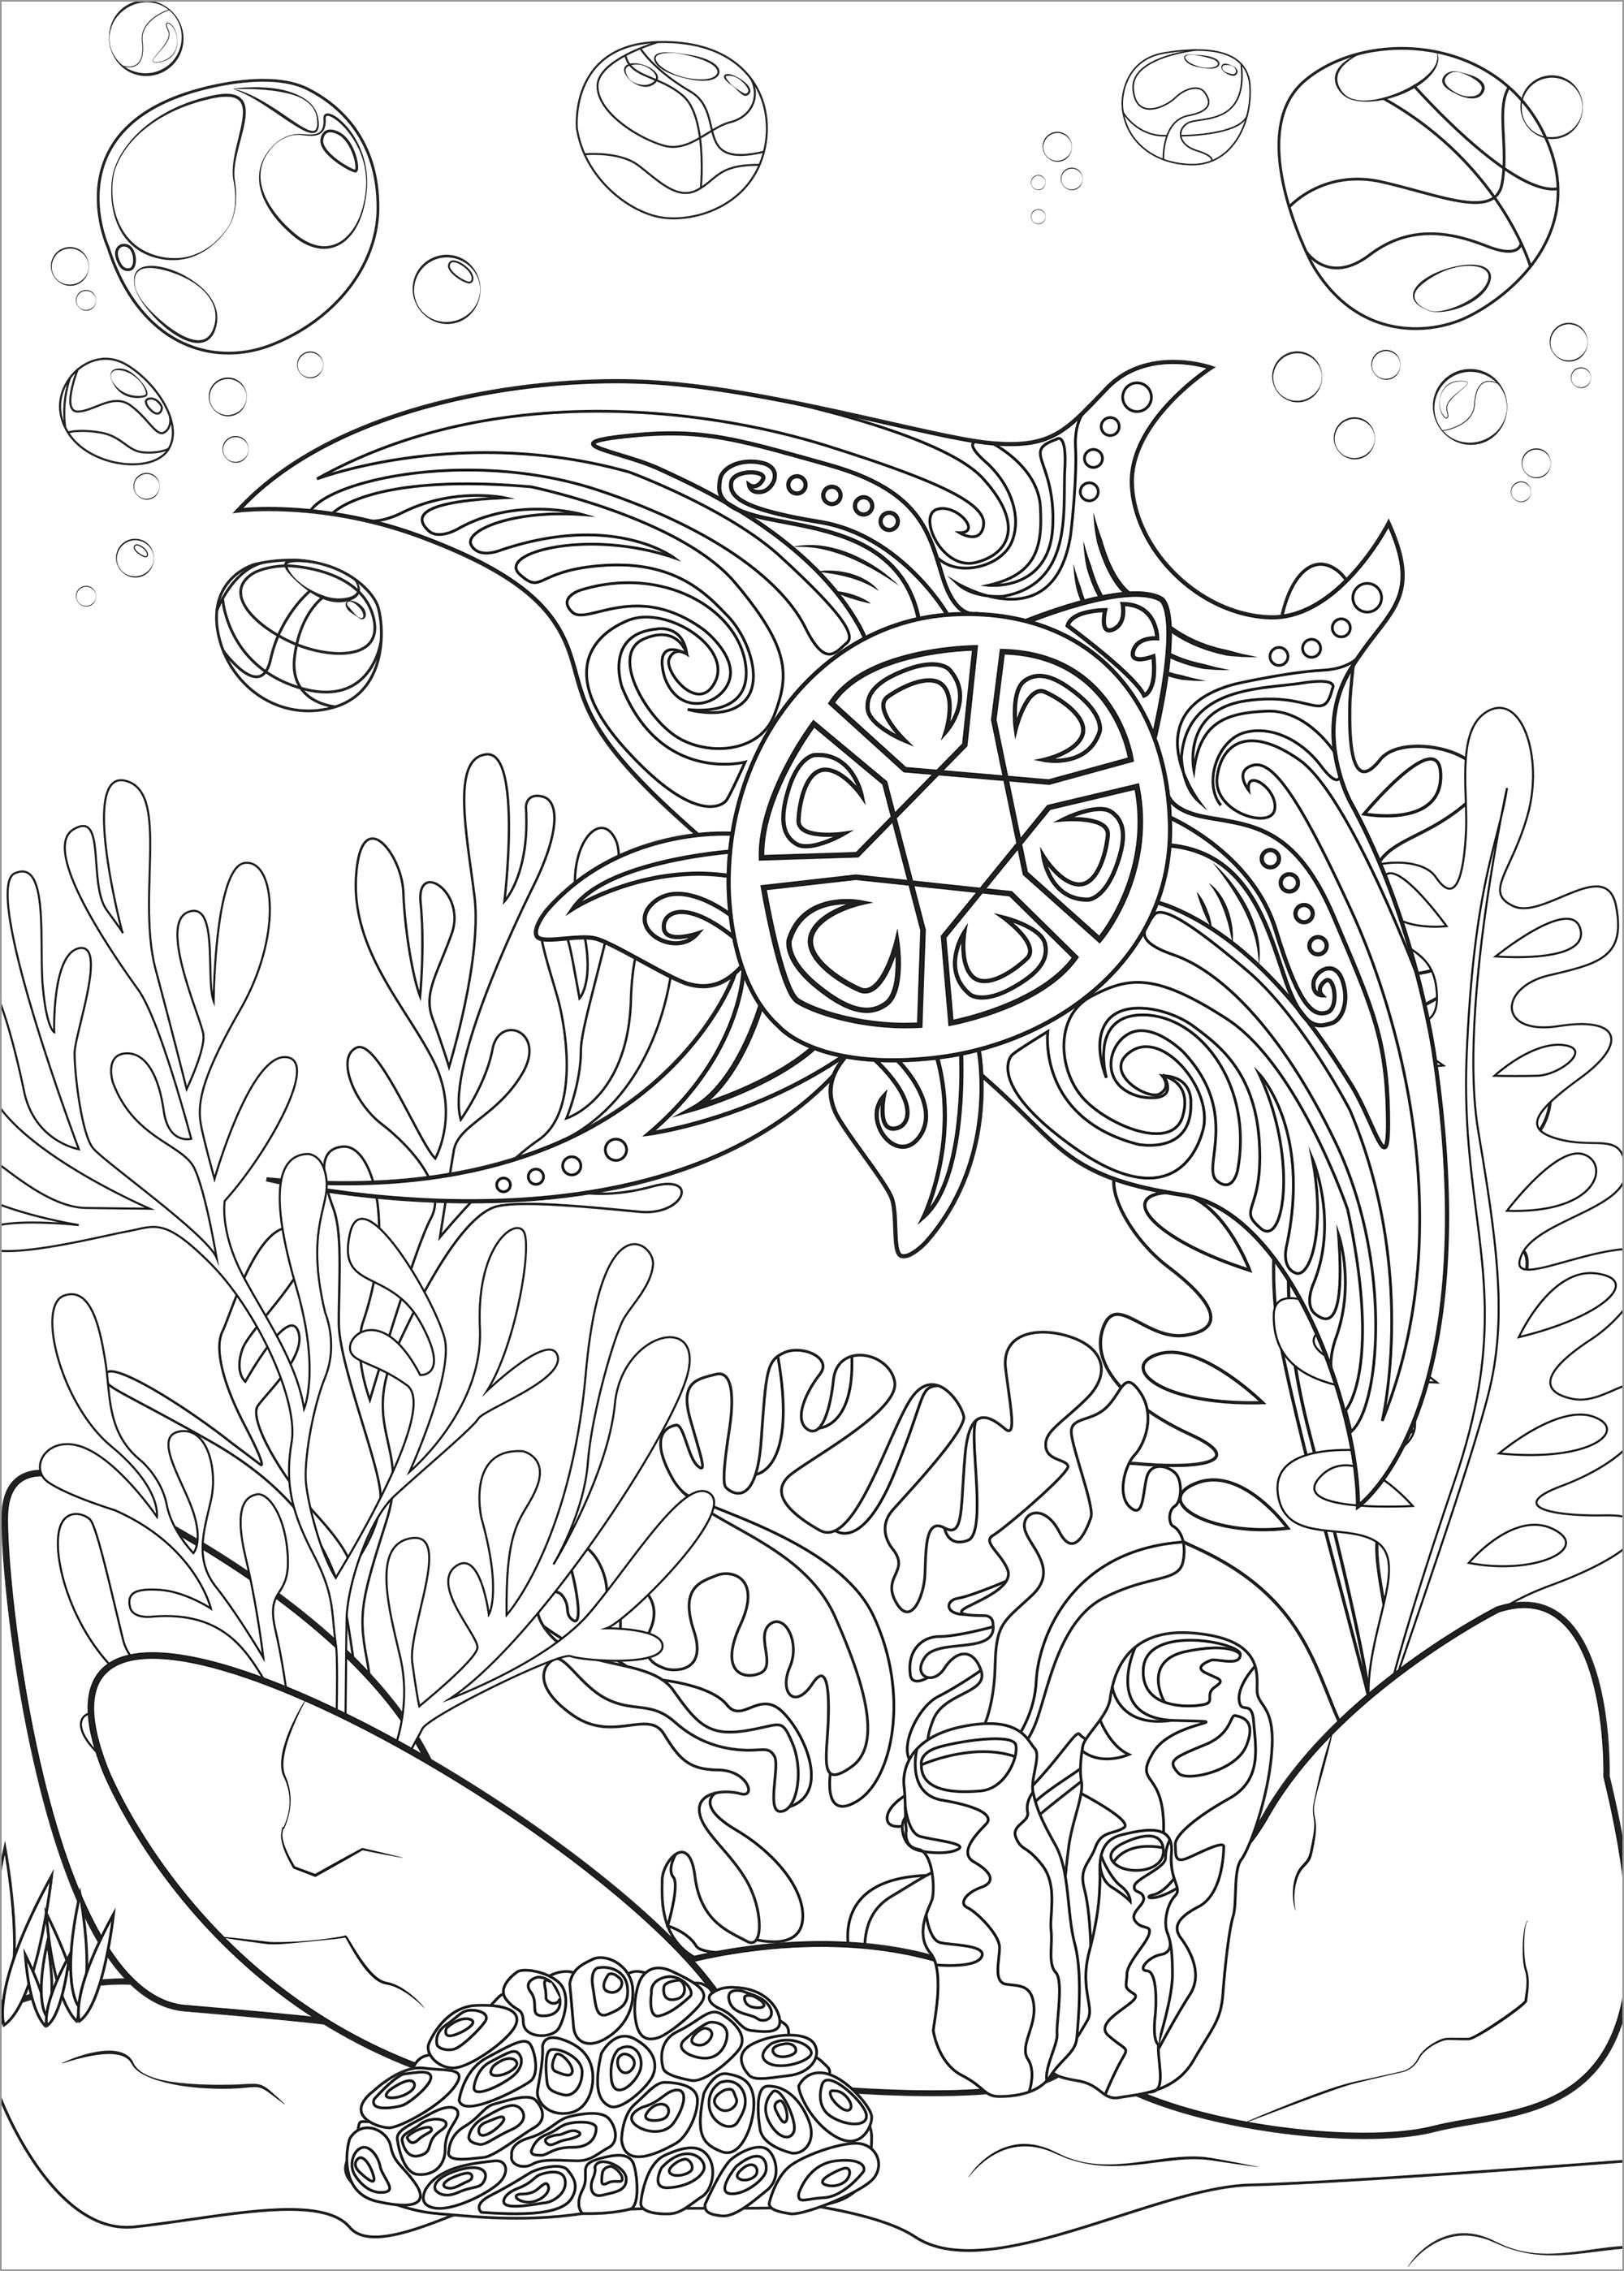 Zentangle Ray Coloring Page for Adults - ColoringBay